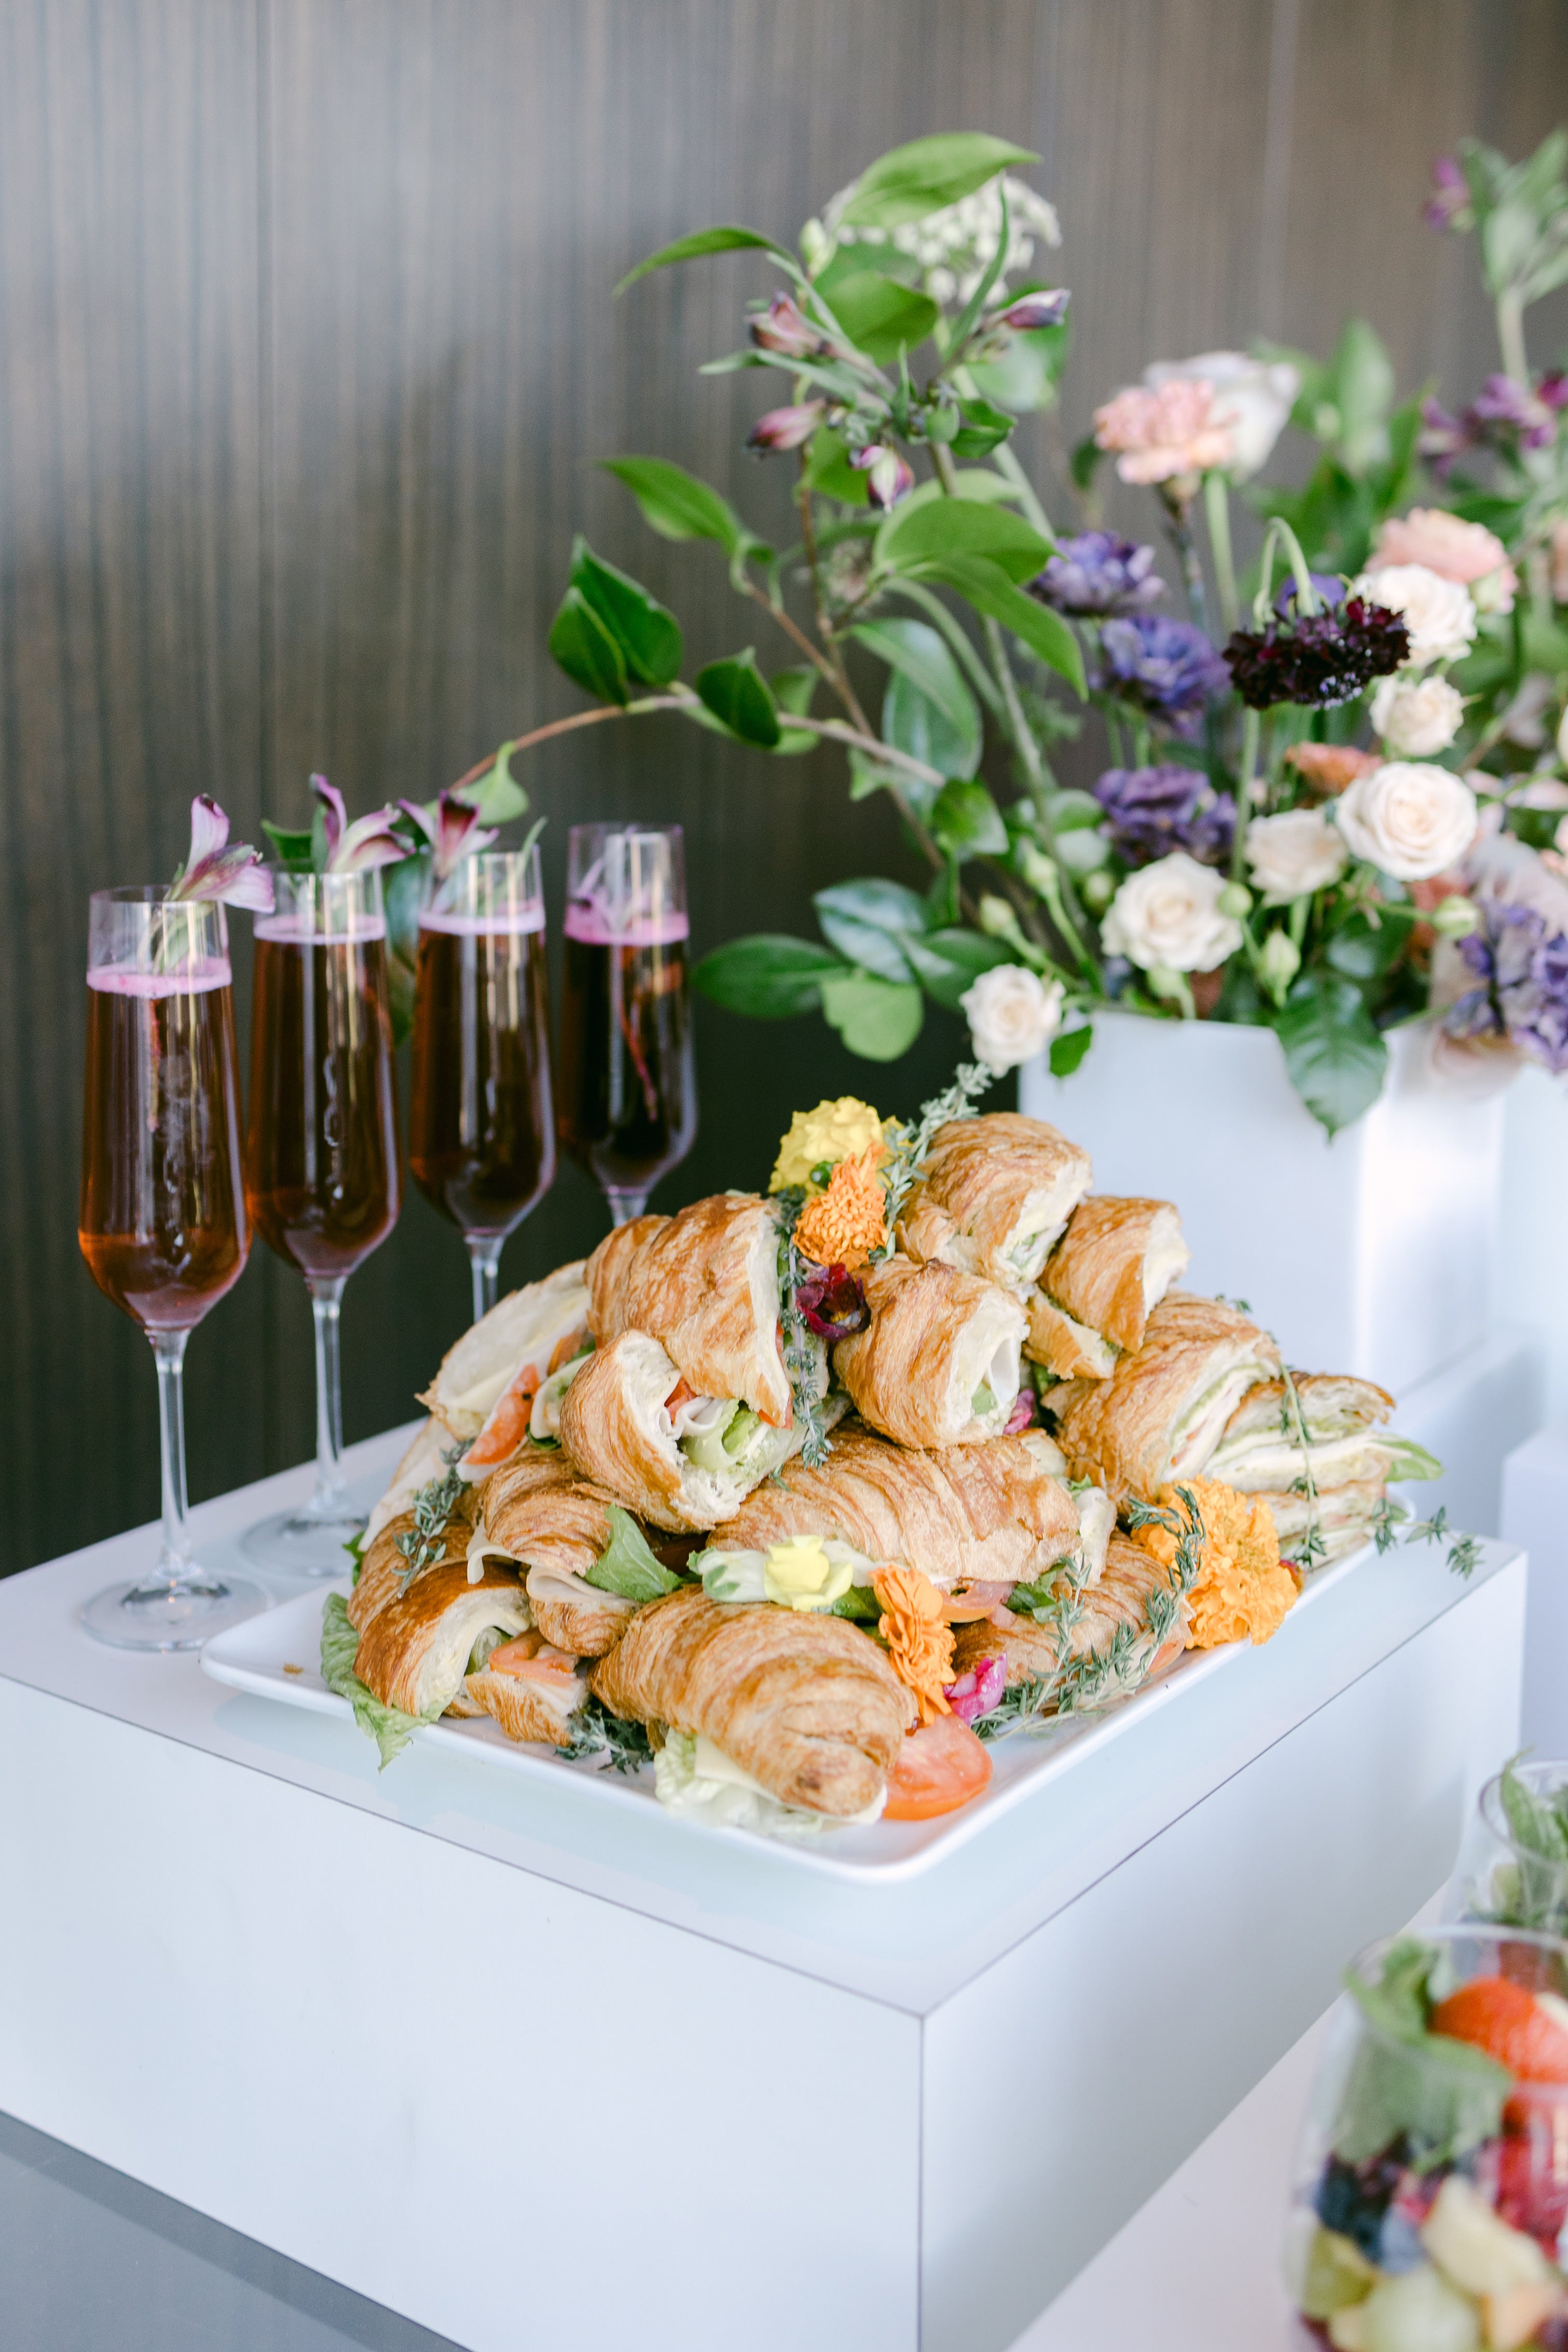 Luxe Bites Catering for Your Baby's First Birthday Bash!